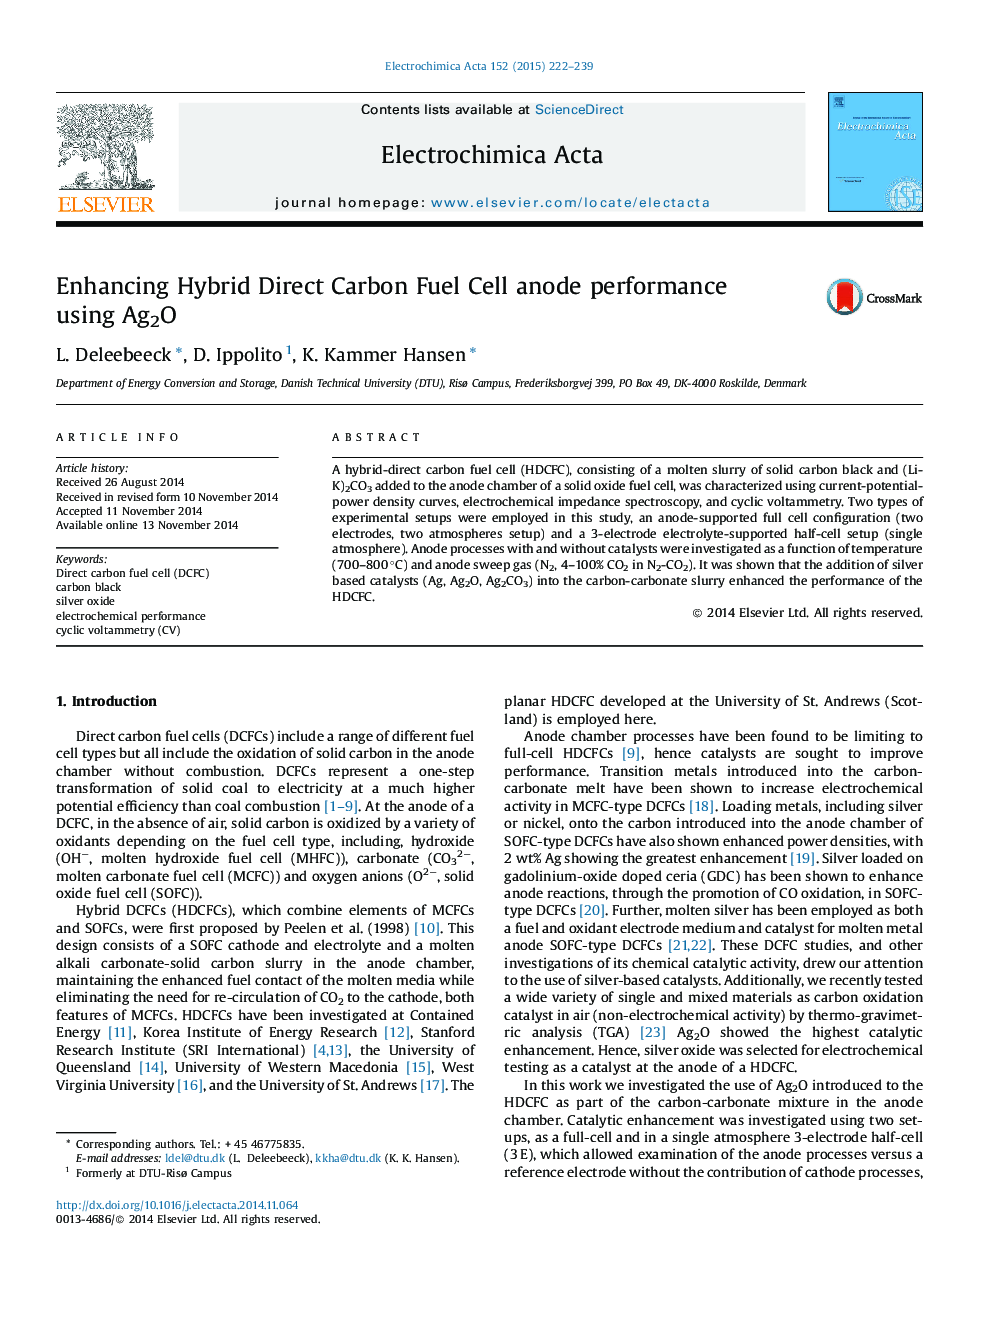 Enhancing Hybrid Direct Carbon Fuel Cell anode performance using Ag2O